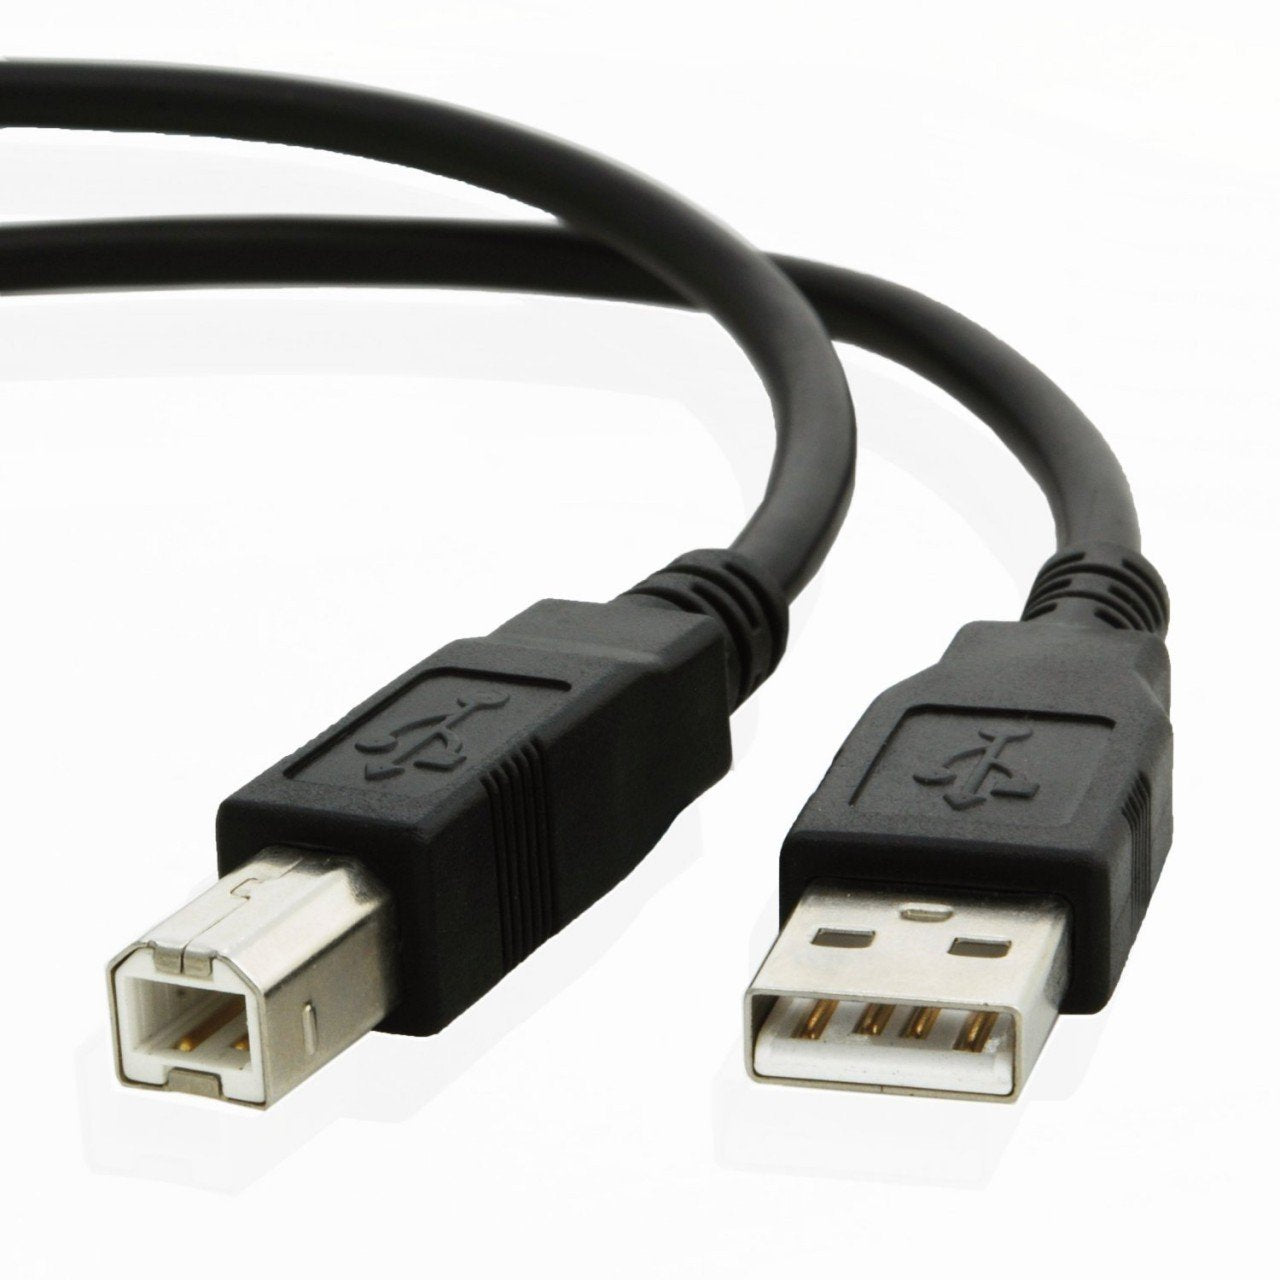 USB cable for Epson WORKFORCE PRO WF-3720